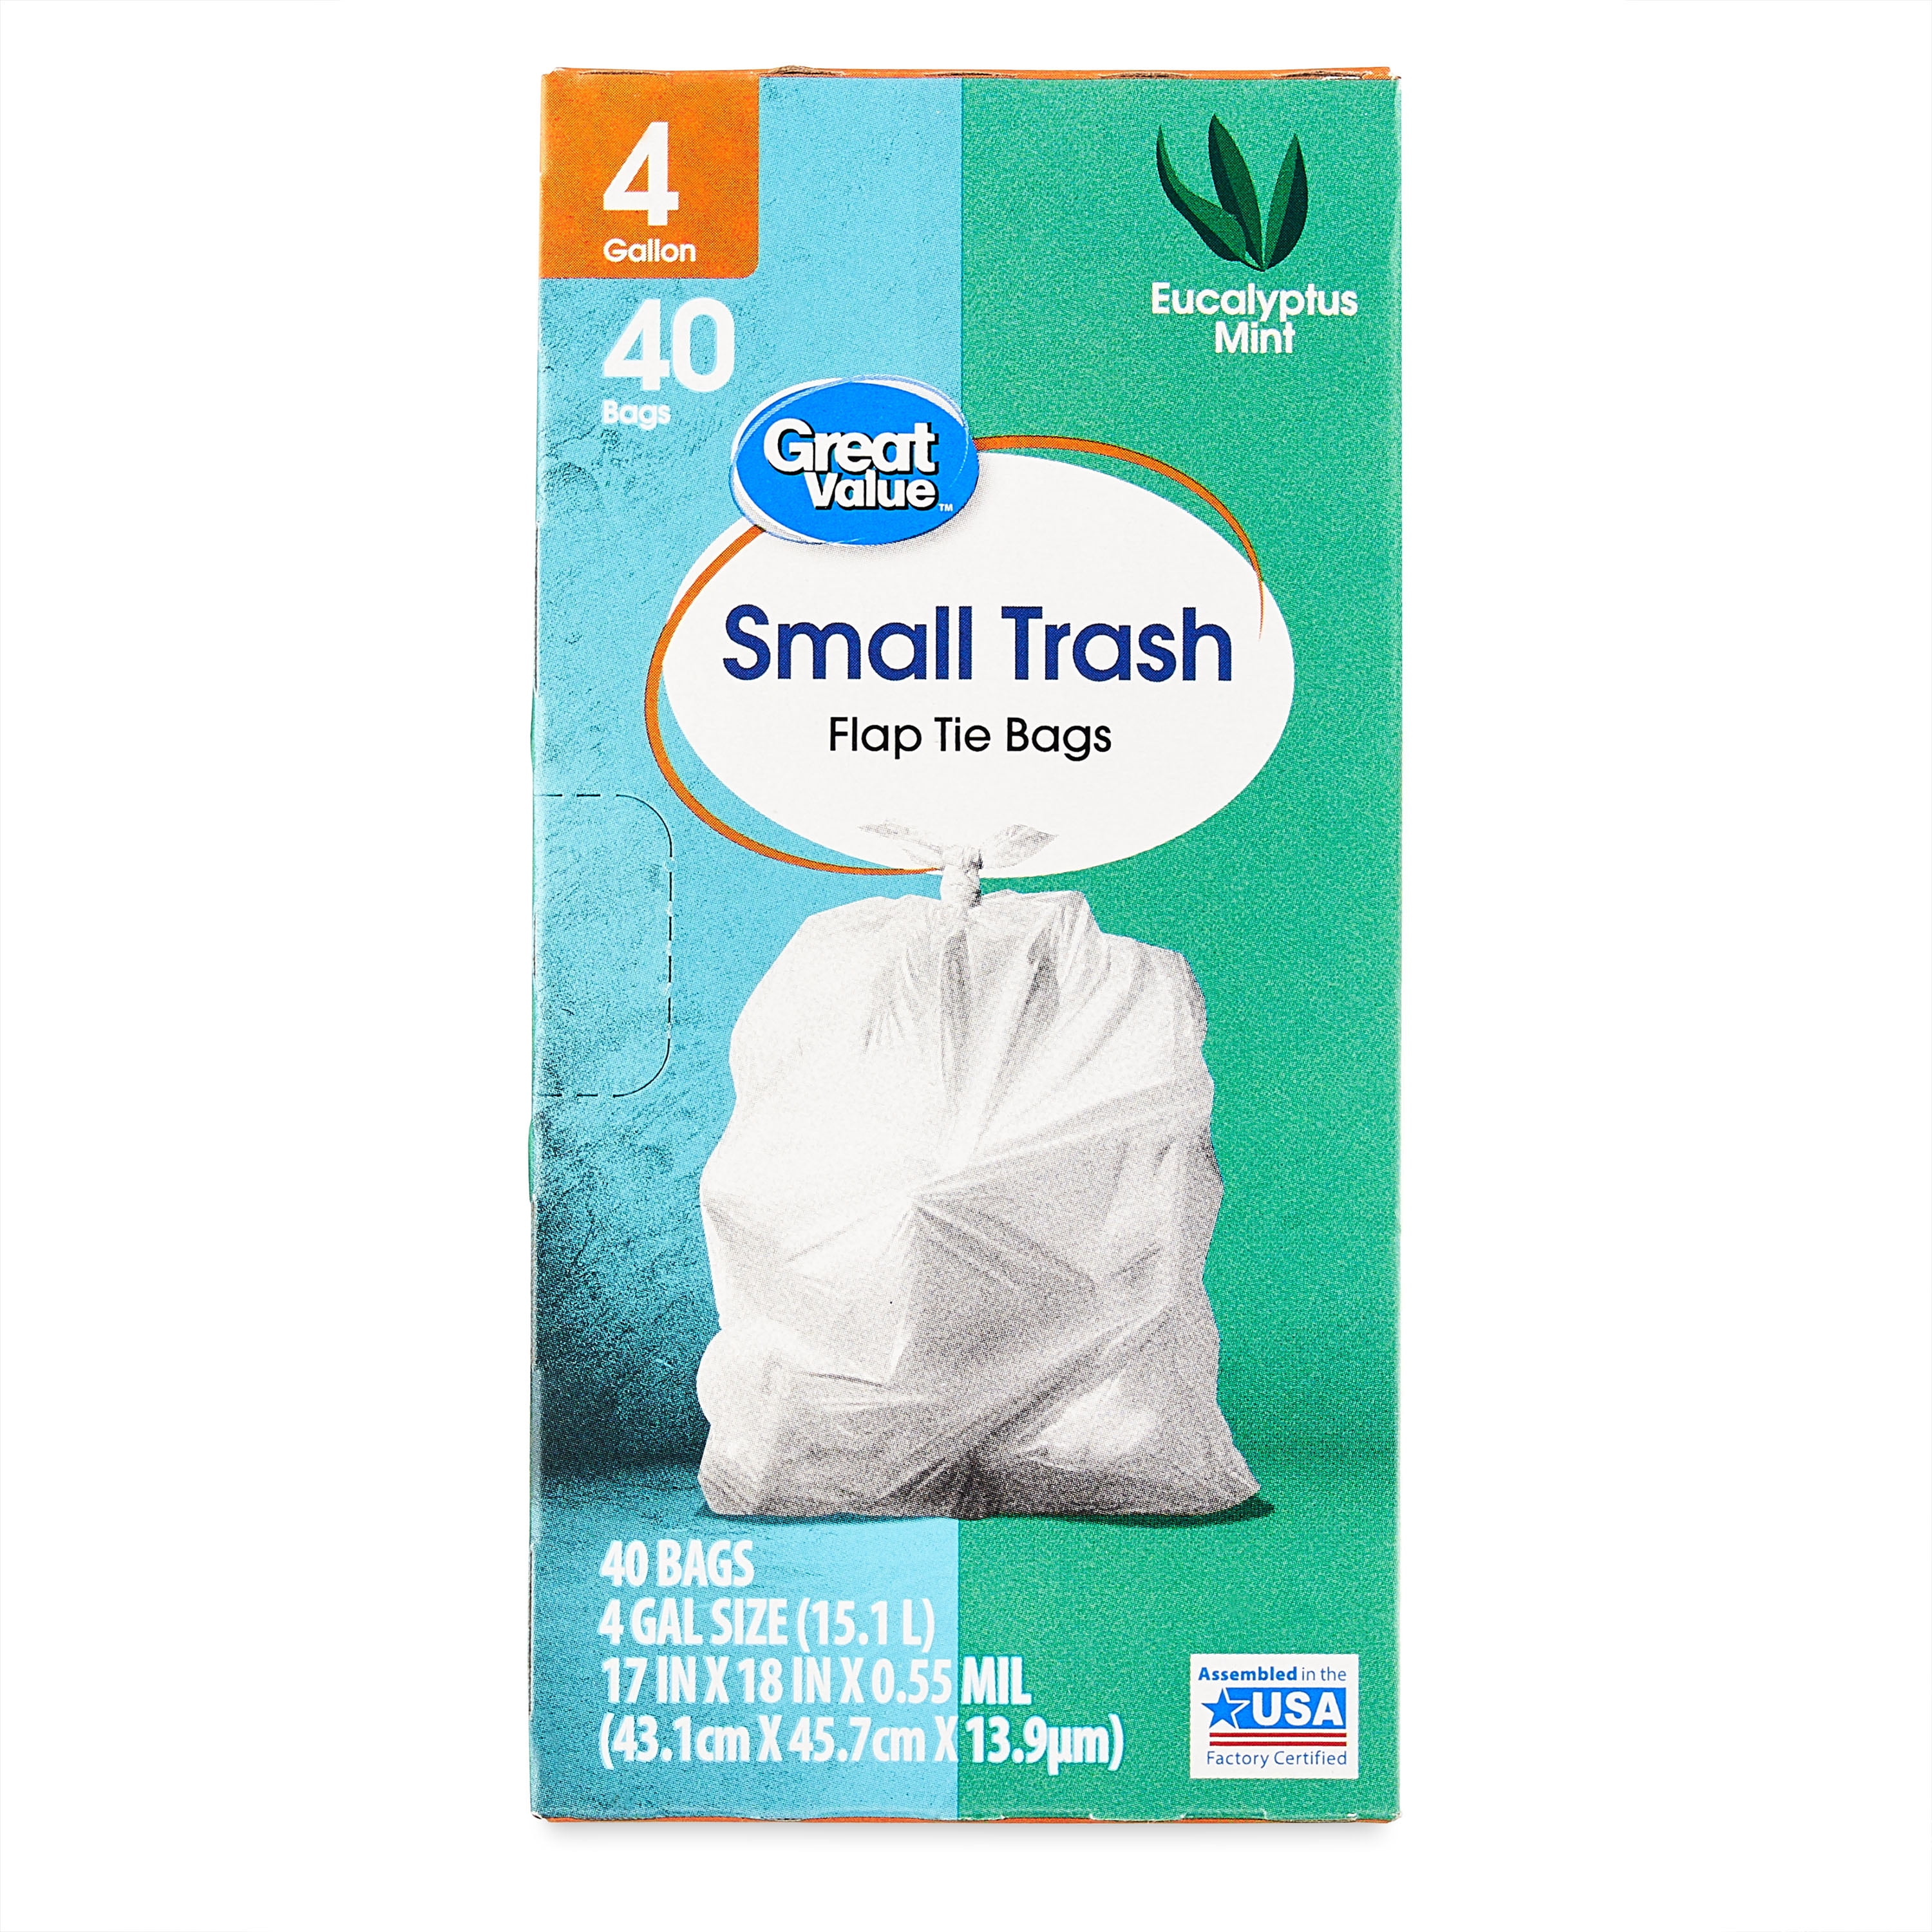 Great Value Small Flap Tie Trash Bags, Eucalyptus Mint Scent, 4